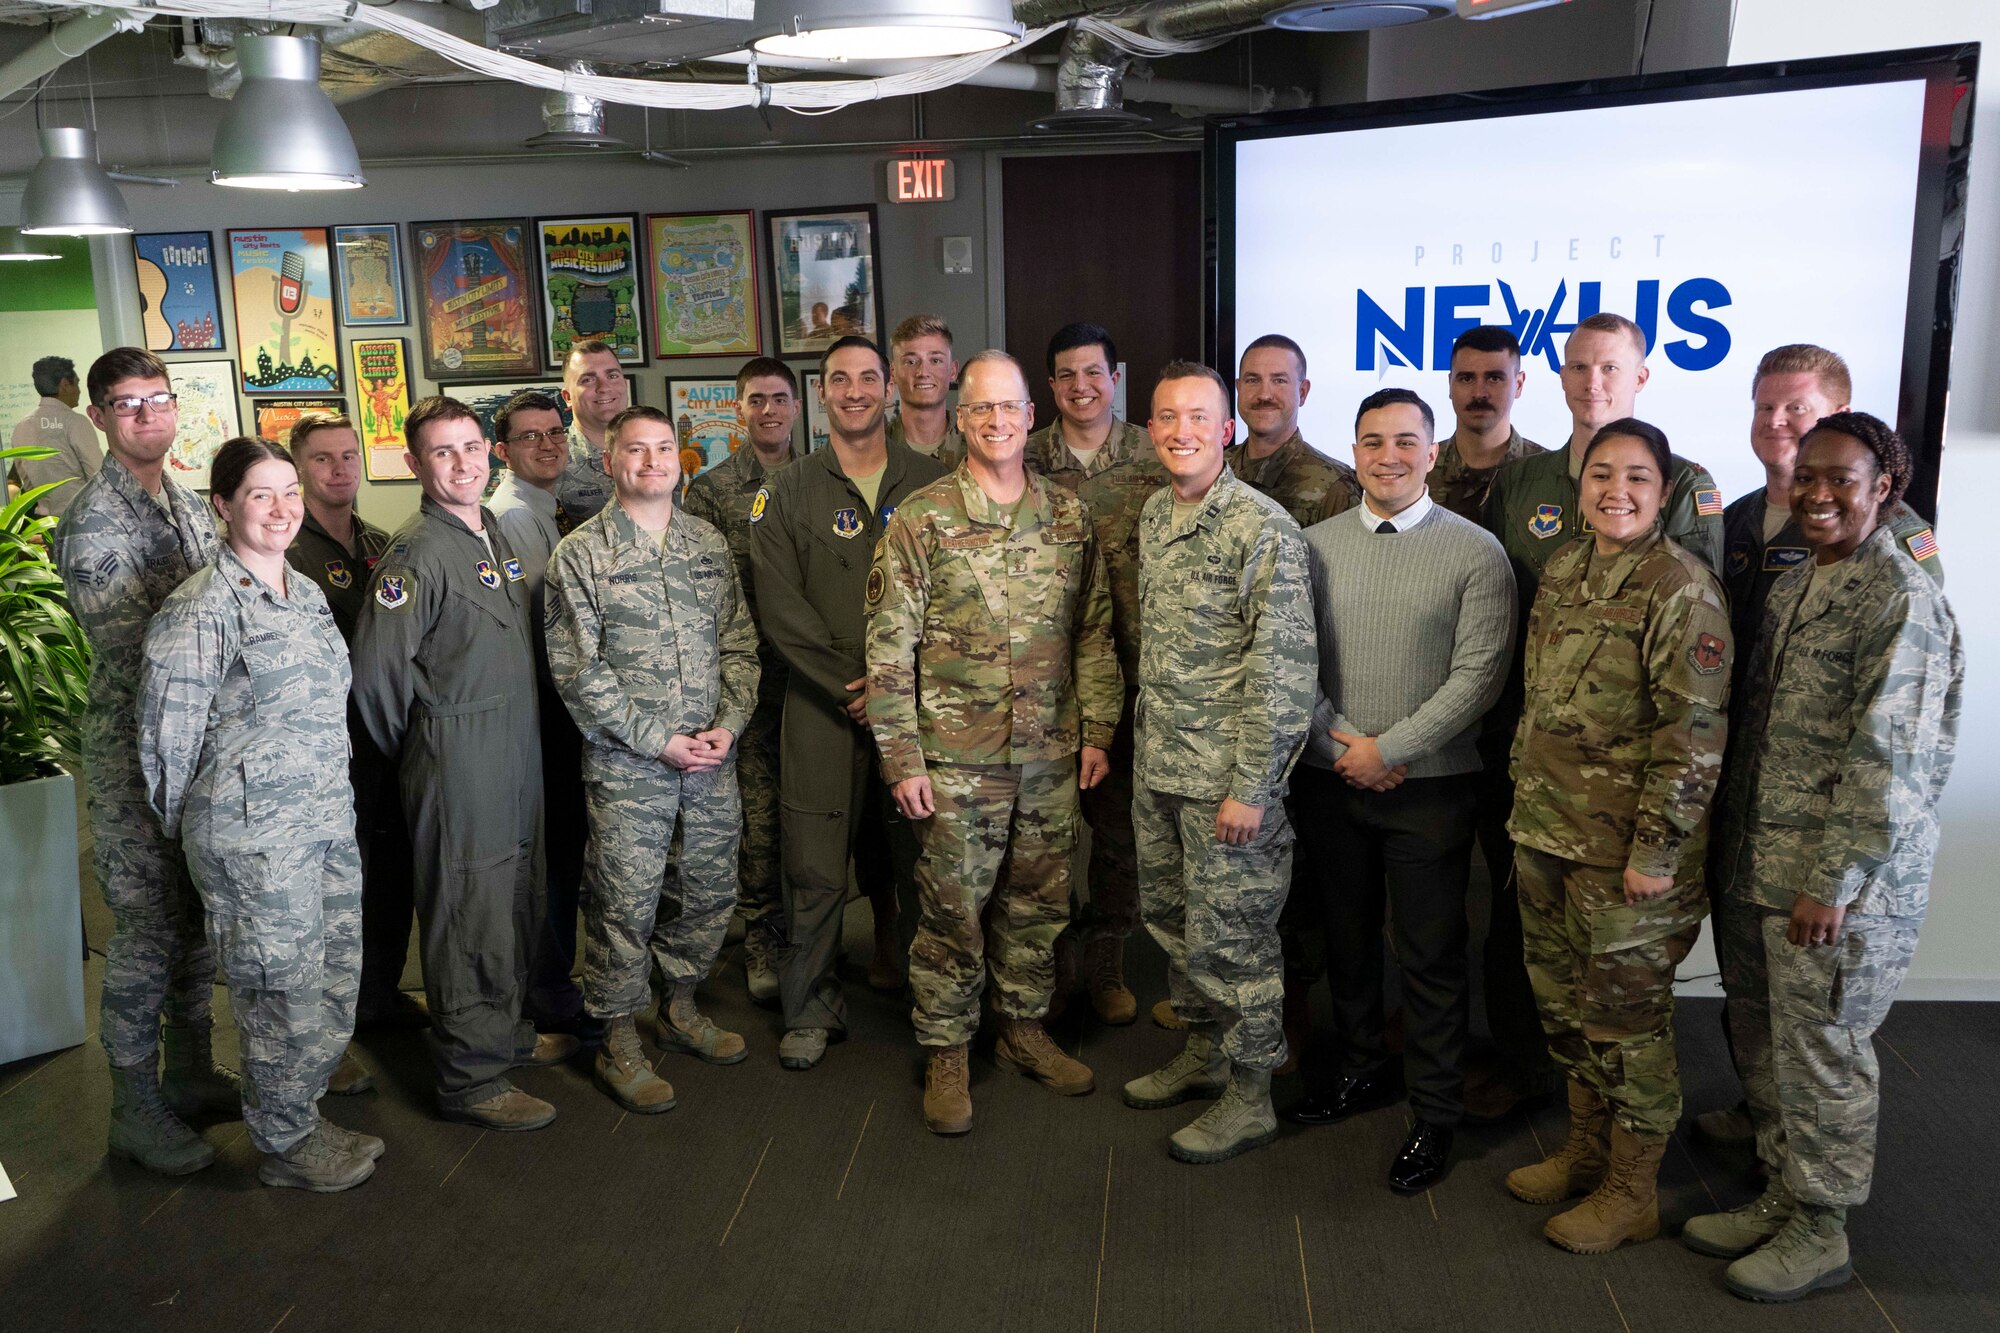 U.S. Air Force Maj. Gen. Mark Weatherington, Air Education and Training Command deputy commander, stands with the first class of the Project NEXUS program after their graduation ceremony Nov. 4, 2019, at the Capital Factory in Austin, Texas. Designed by the AETC Technology Integration Detachment and hosted by the AFWERX-Austin hub, the beta test program was designed to fuel organic technology problem solving efforts for Airmen in their day-to-day workplaces. (Air National Guard Photo by Staff Sgt. Jordyn Fetter)